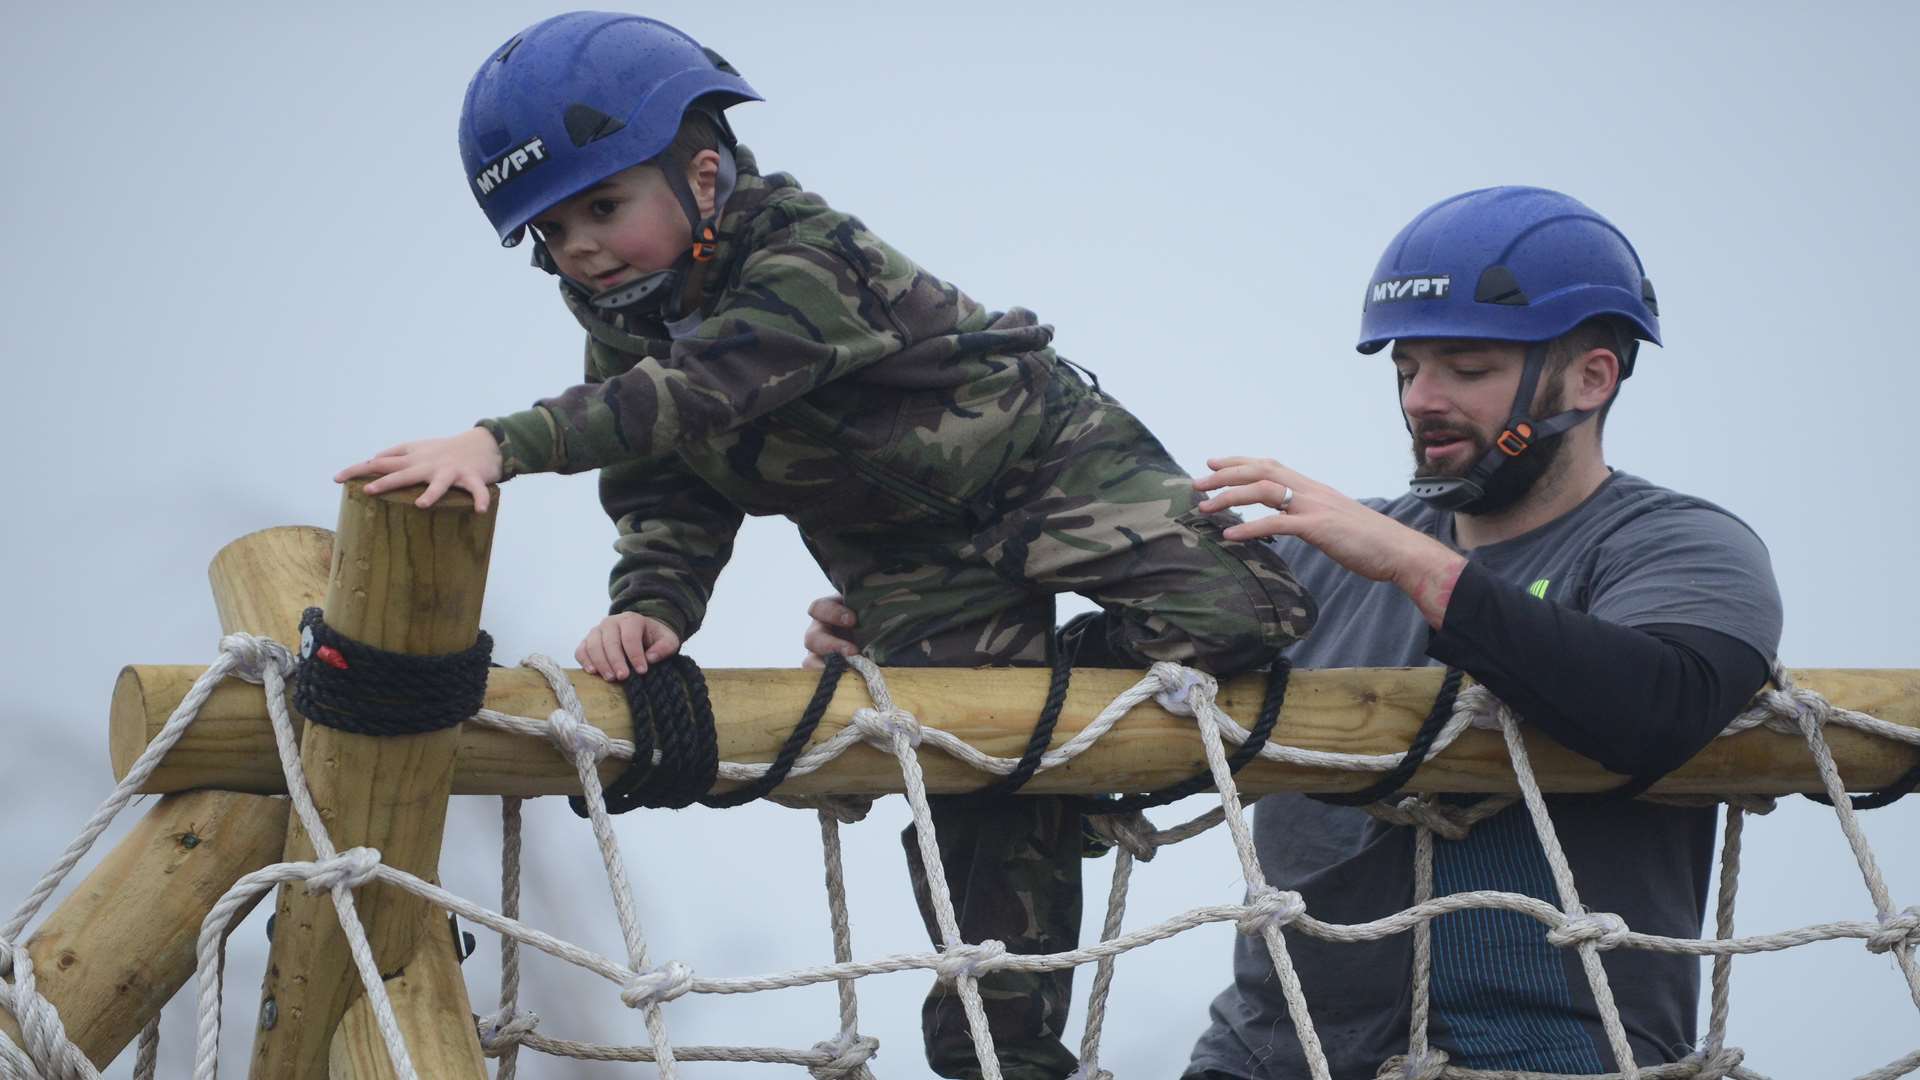 Harry Tilbury, six, helped over the new Deal assault course by his dad James.